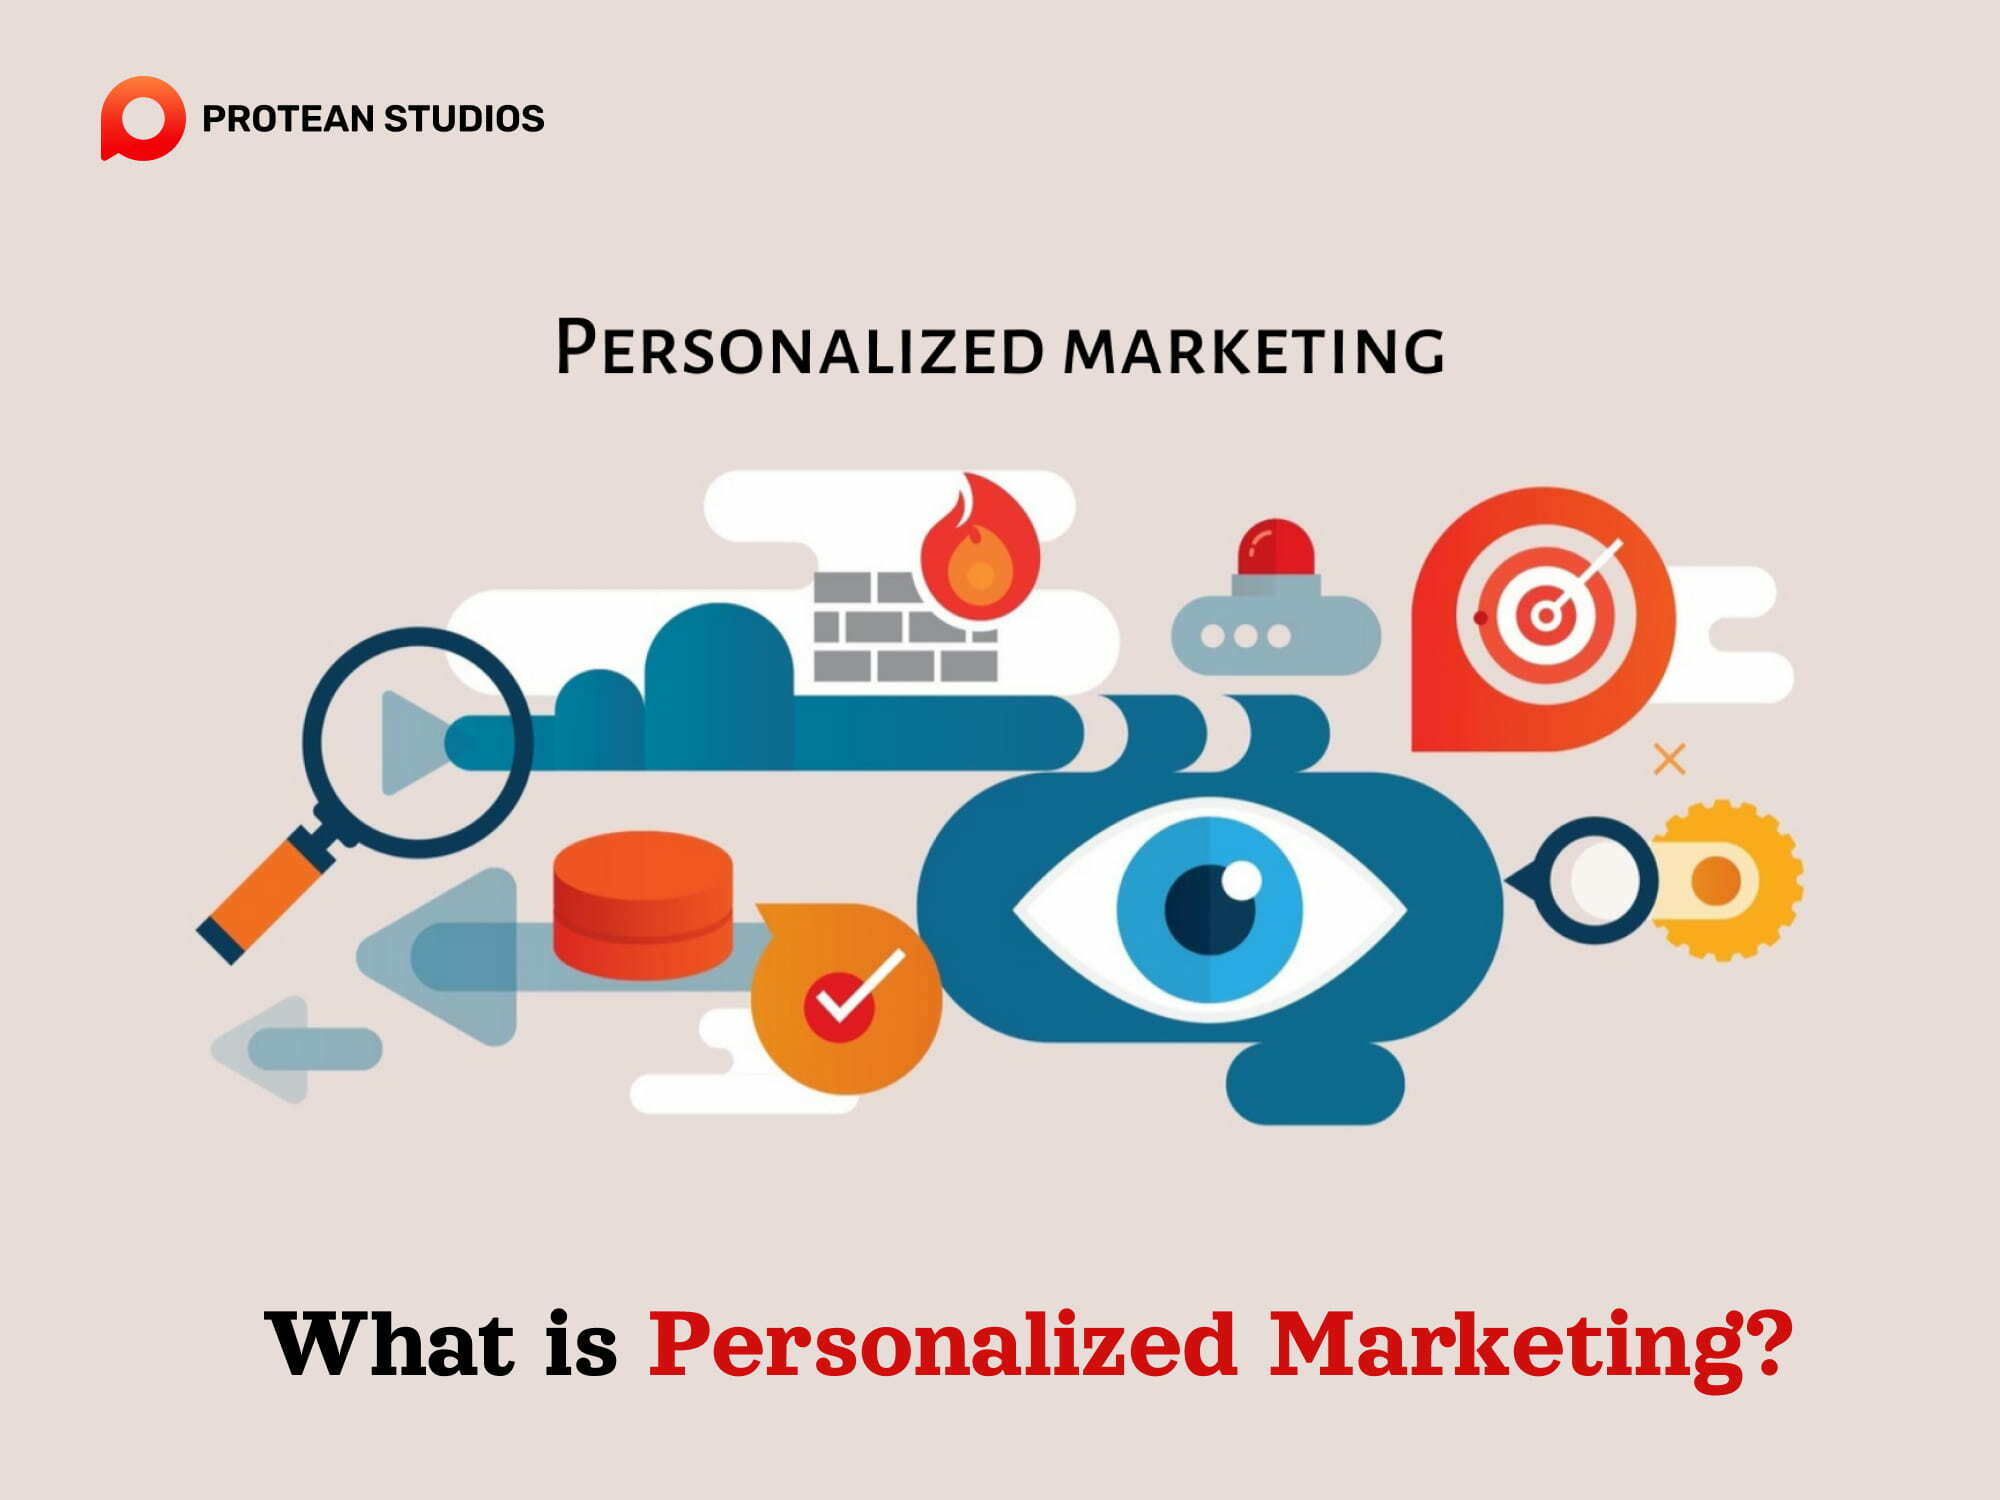 Some fundamental information about personalized marketing